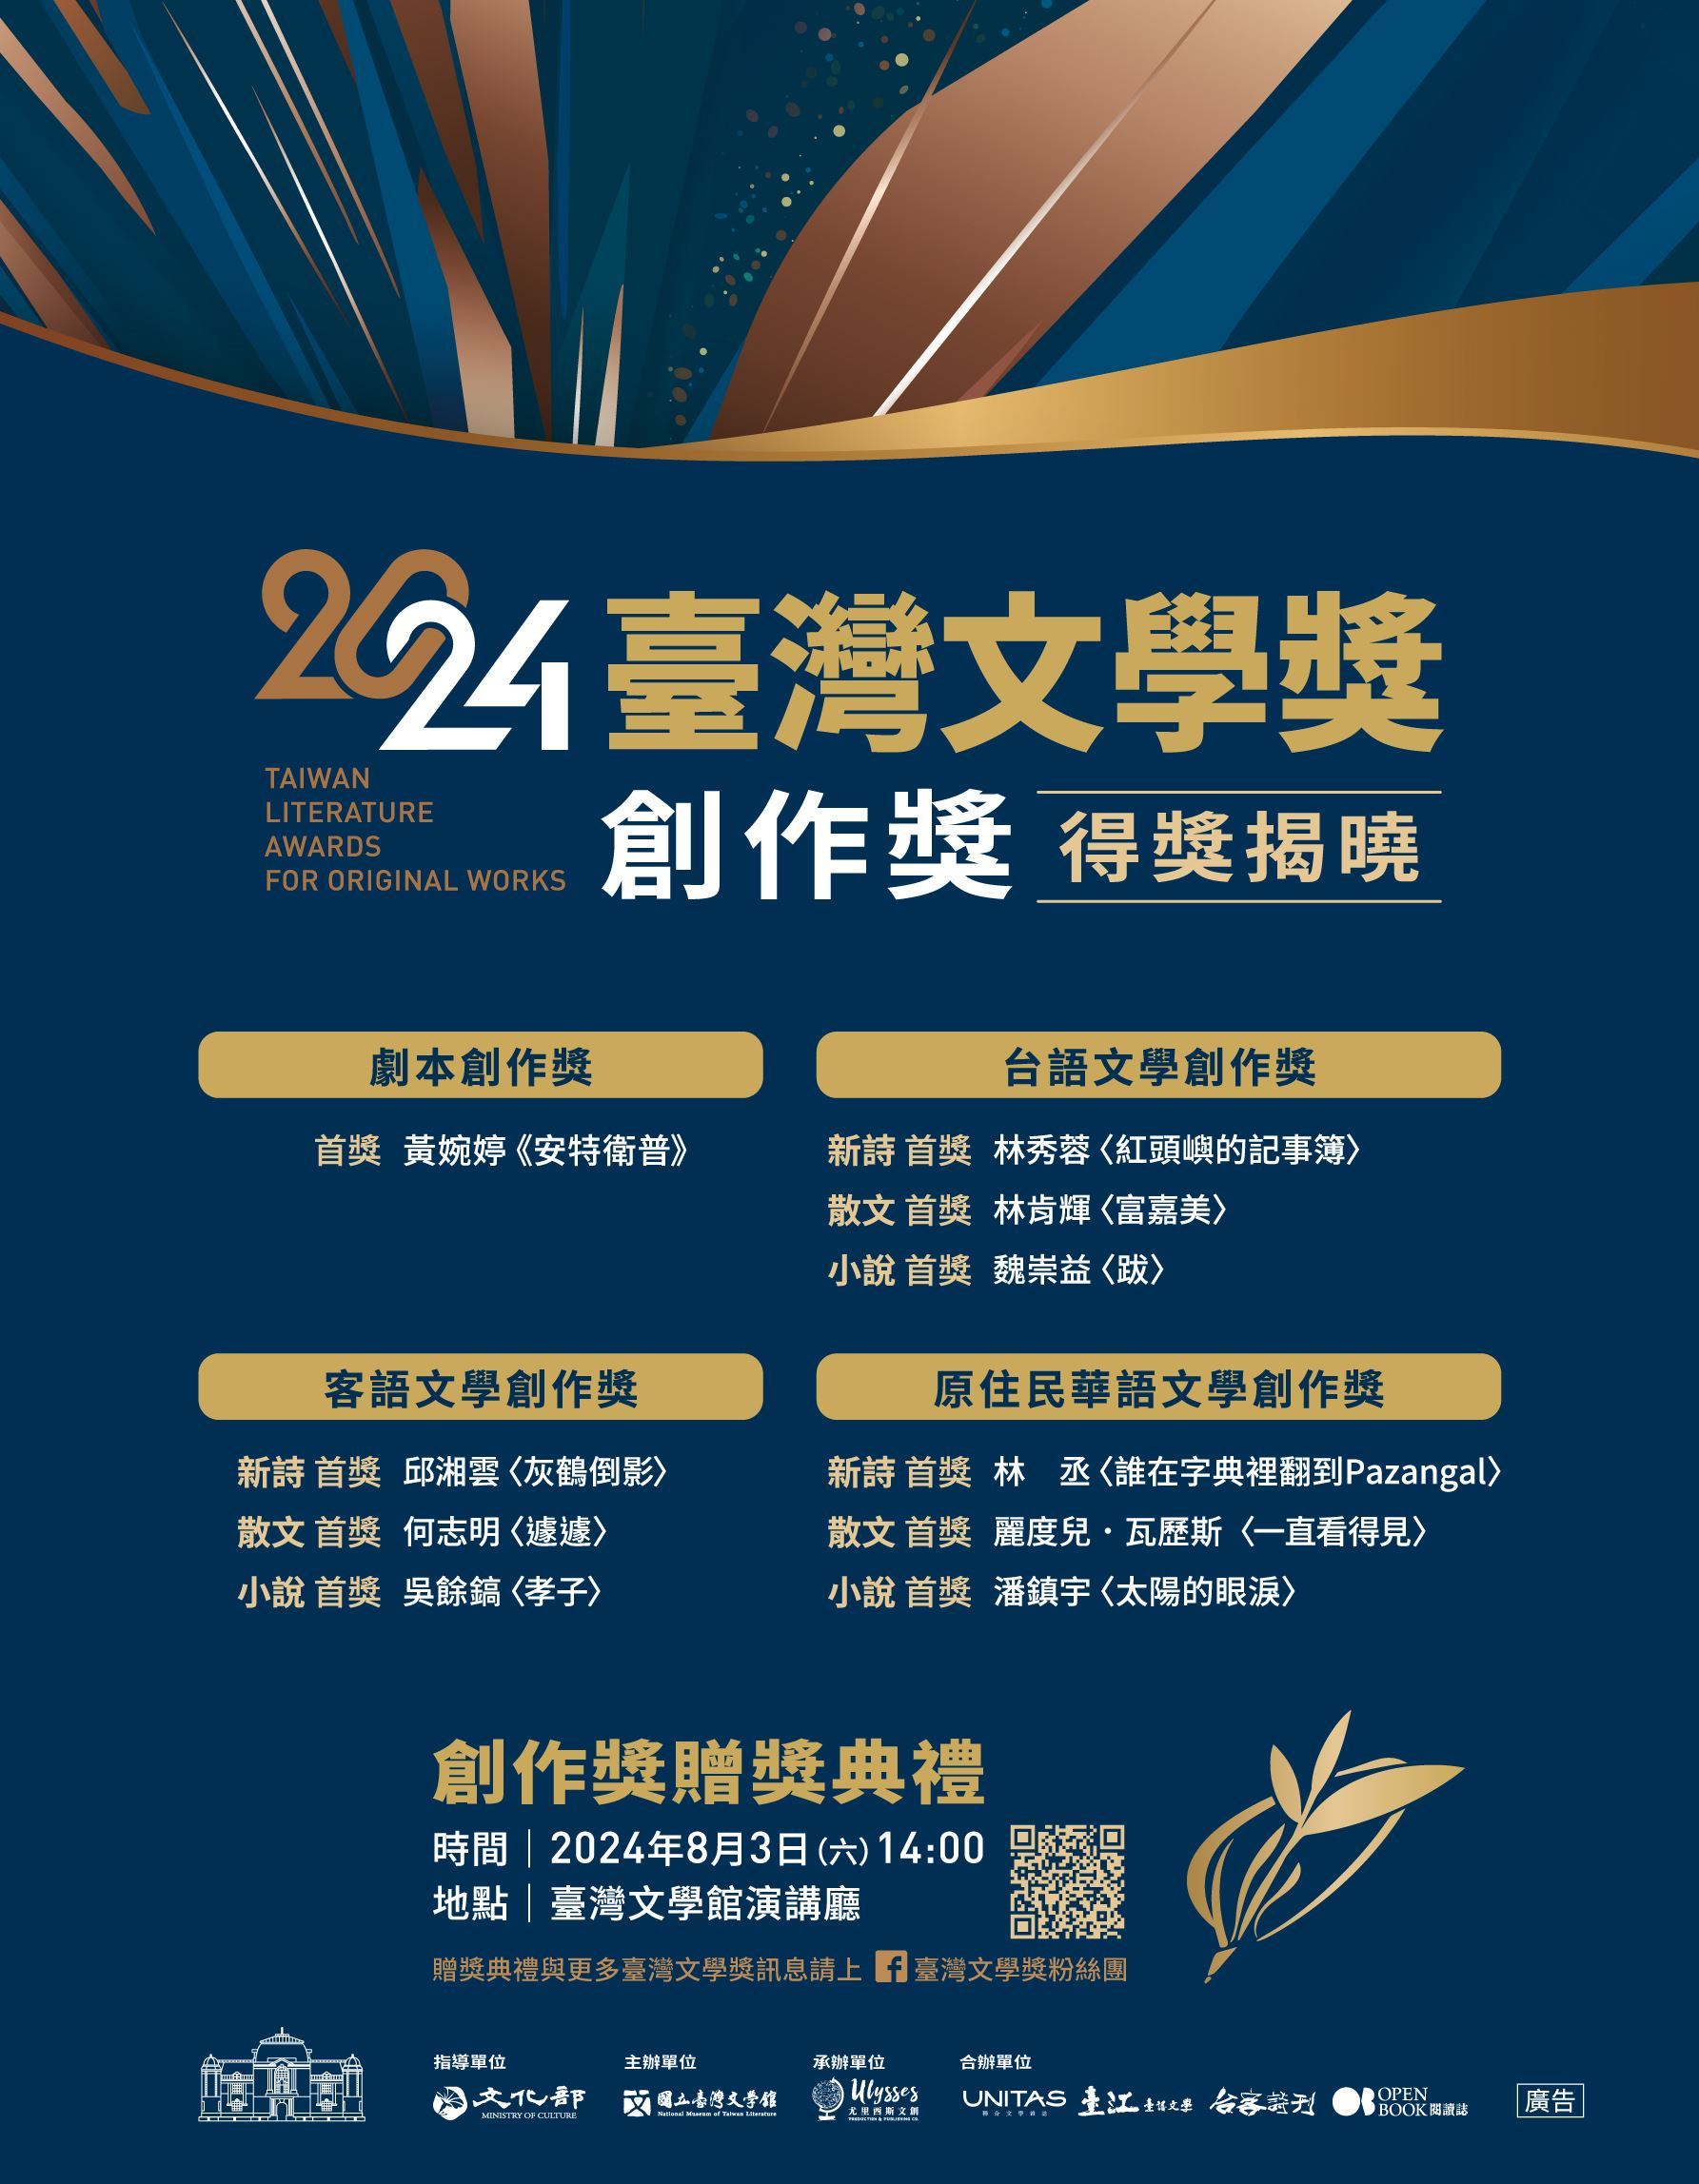 2024 Taiwan Literature Awards for Original Works winners unveiled